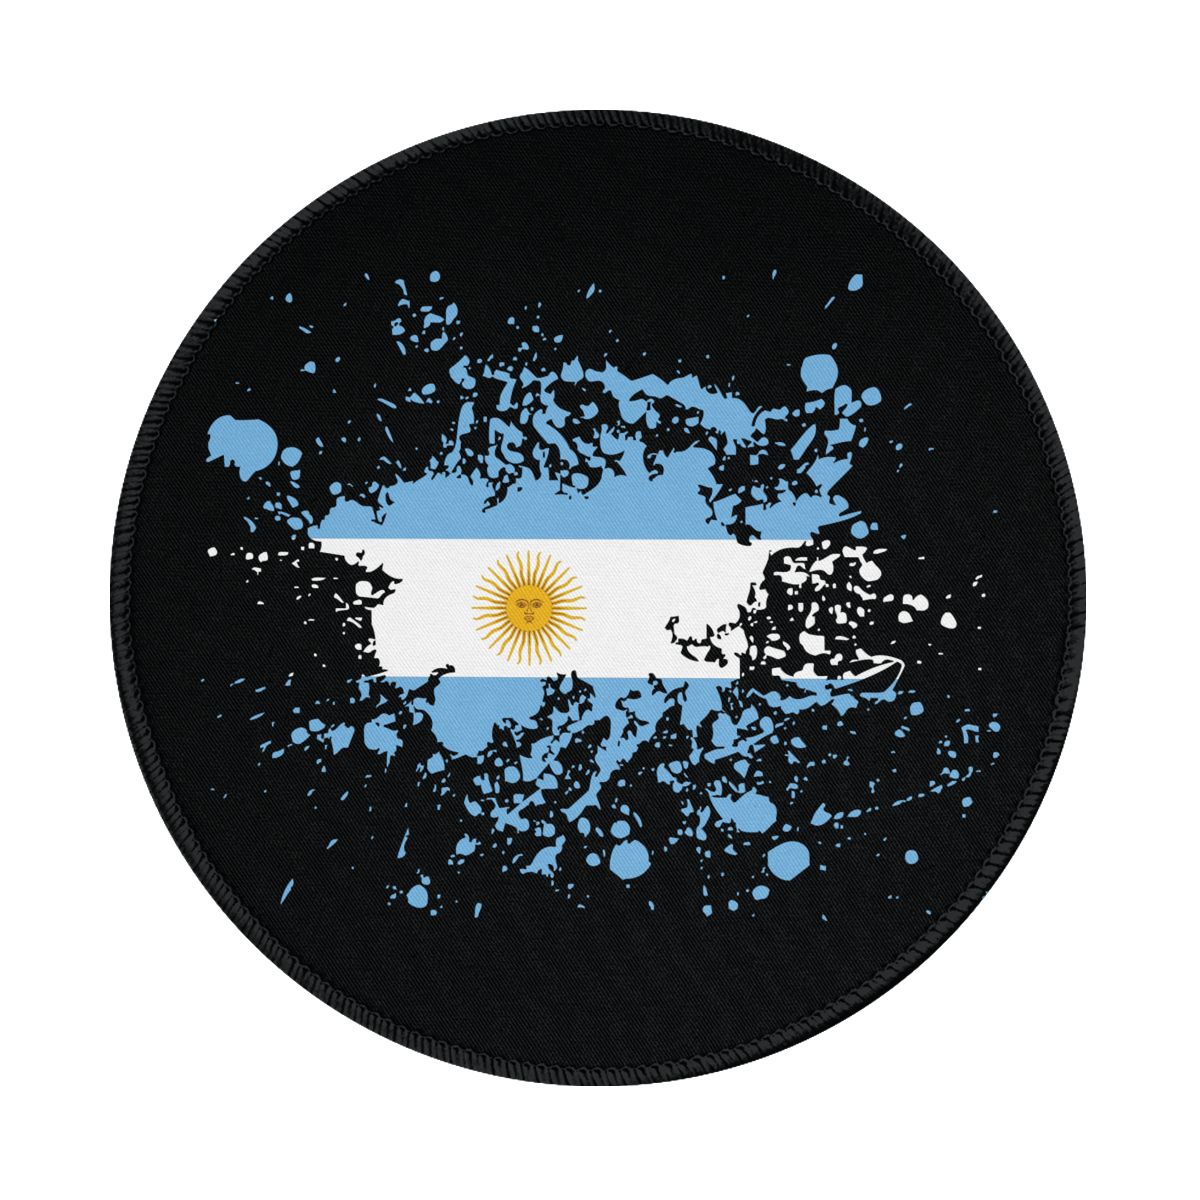 Argentina Ink Spatter Non-Slip Rubber Round Mouse Pad